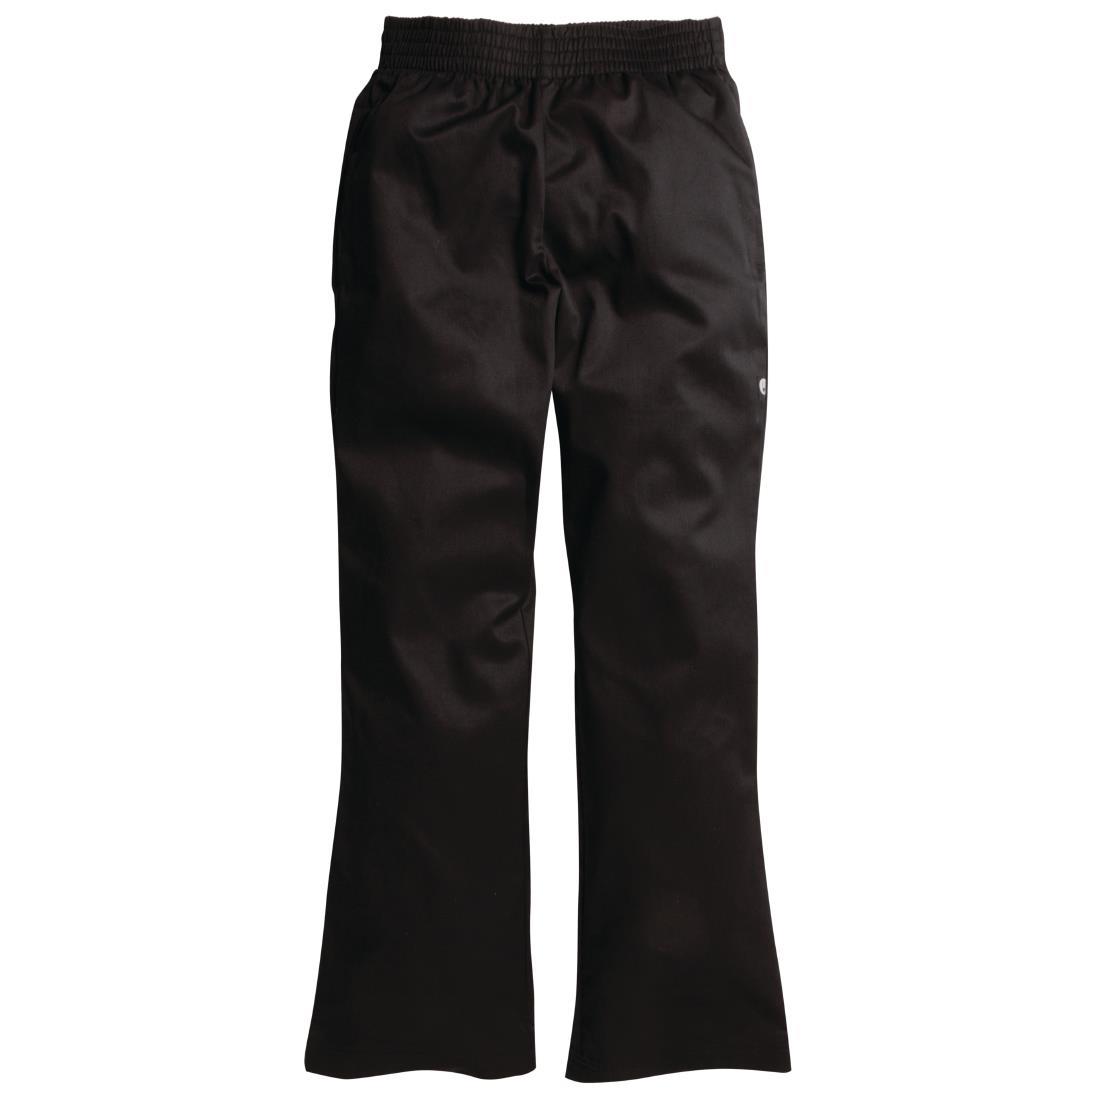 Chef Works Womens Basic Baggy Chefs Trousers Black L - B223-L  - 2